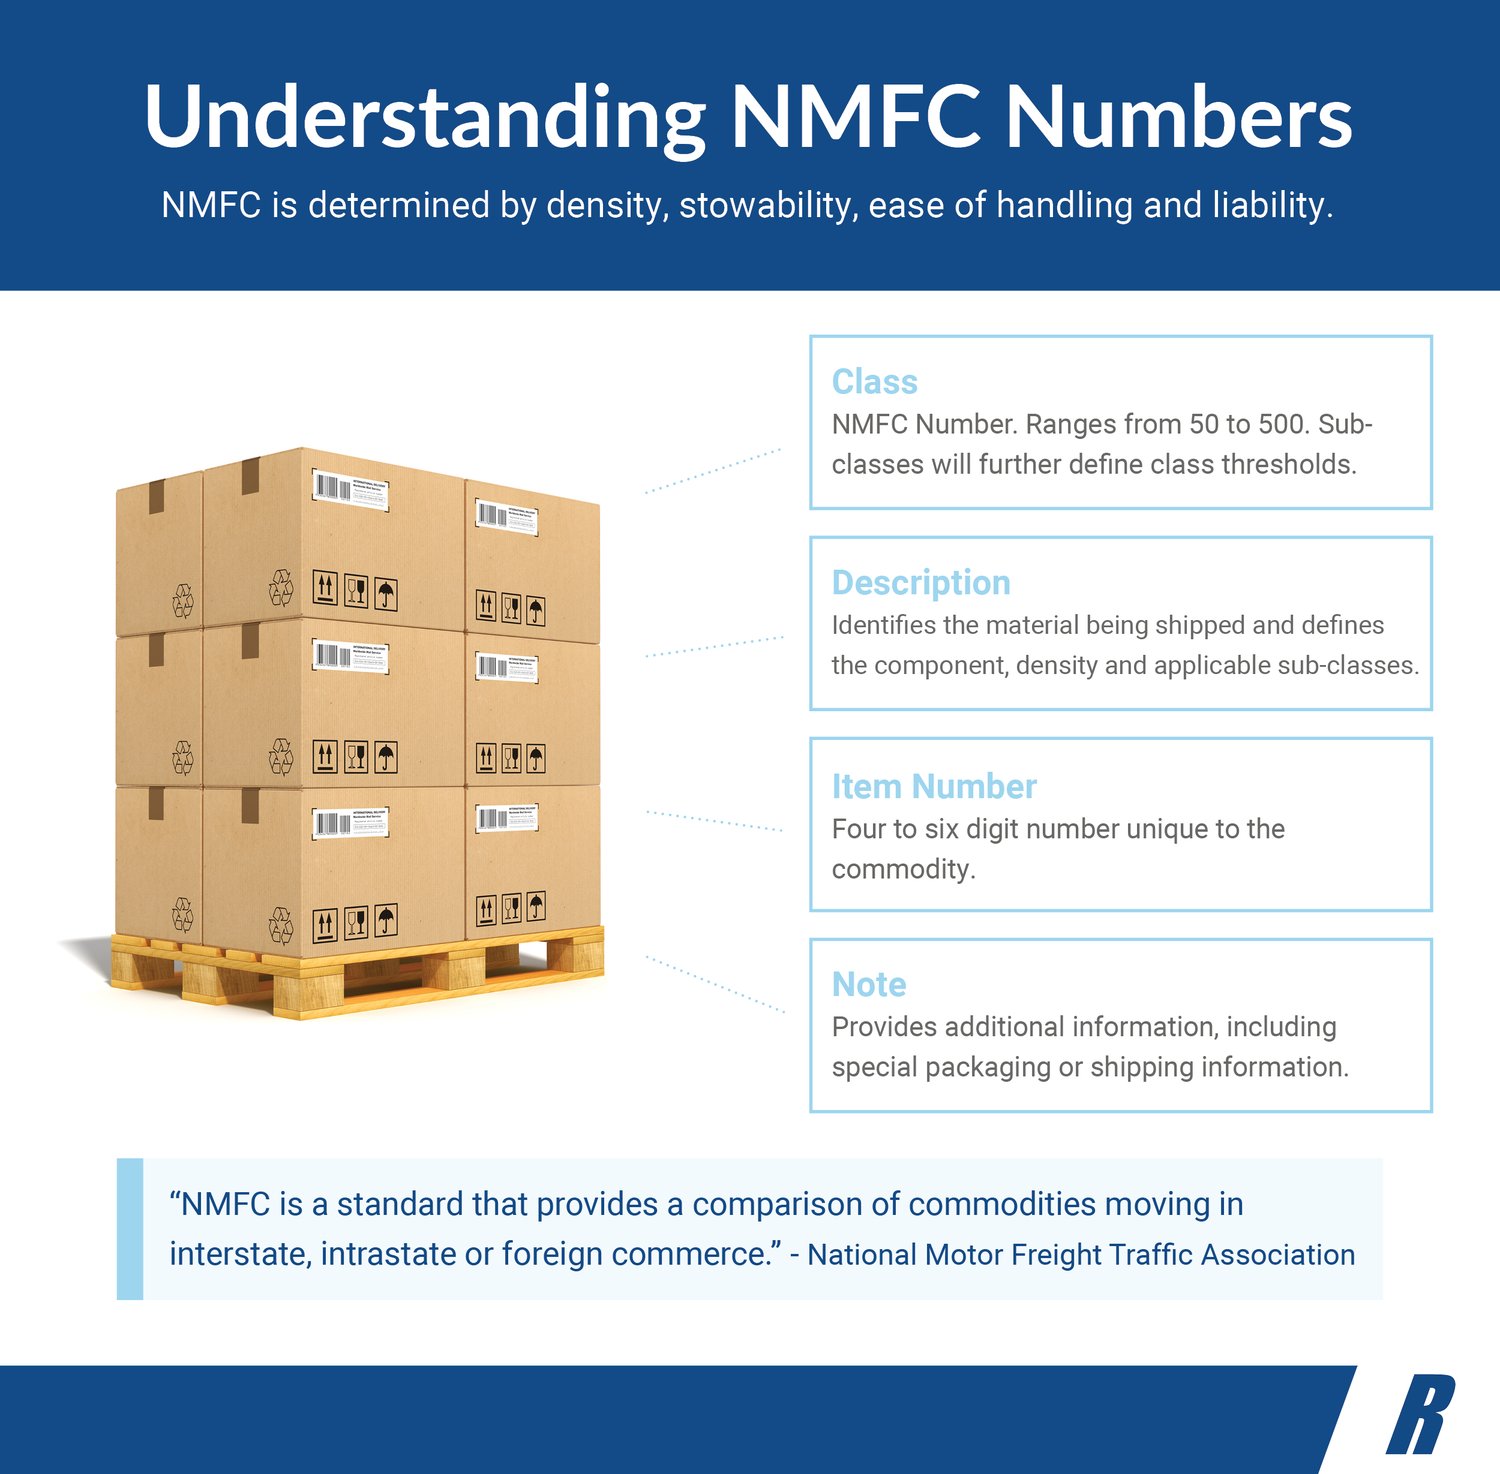 What is an NMFC Number?